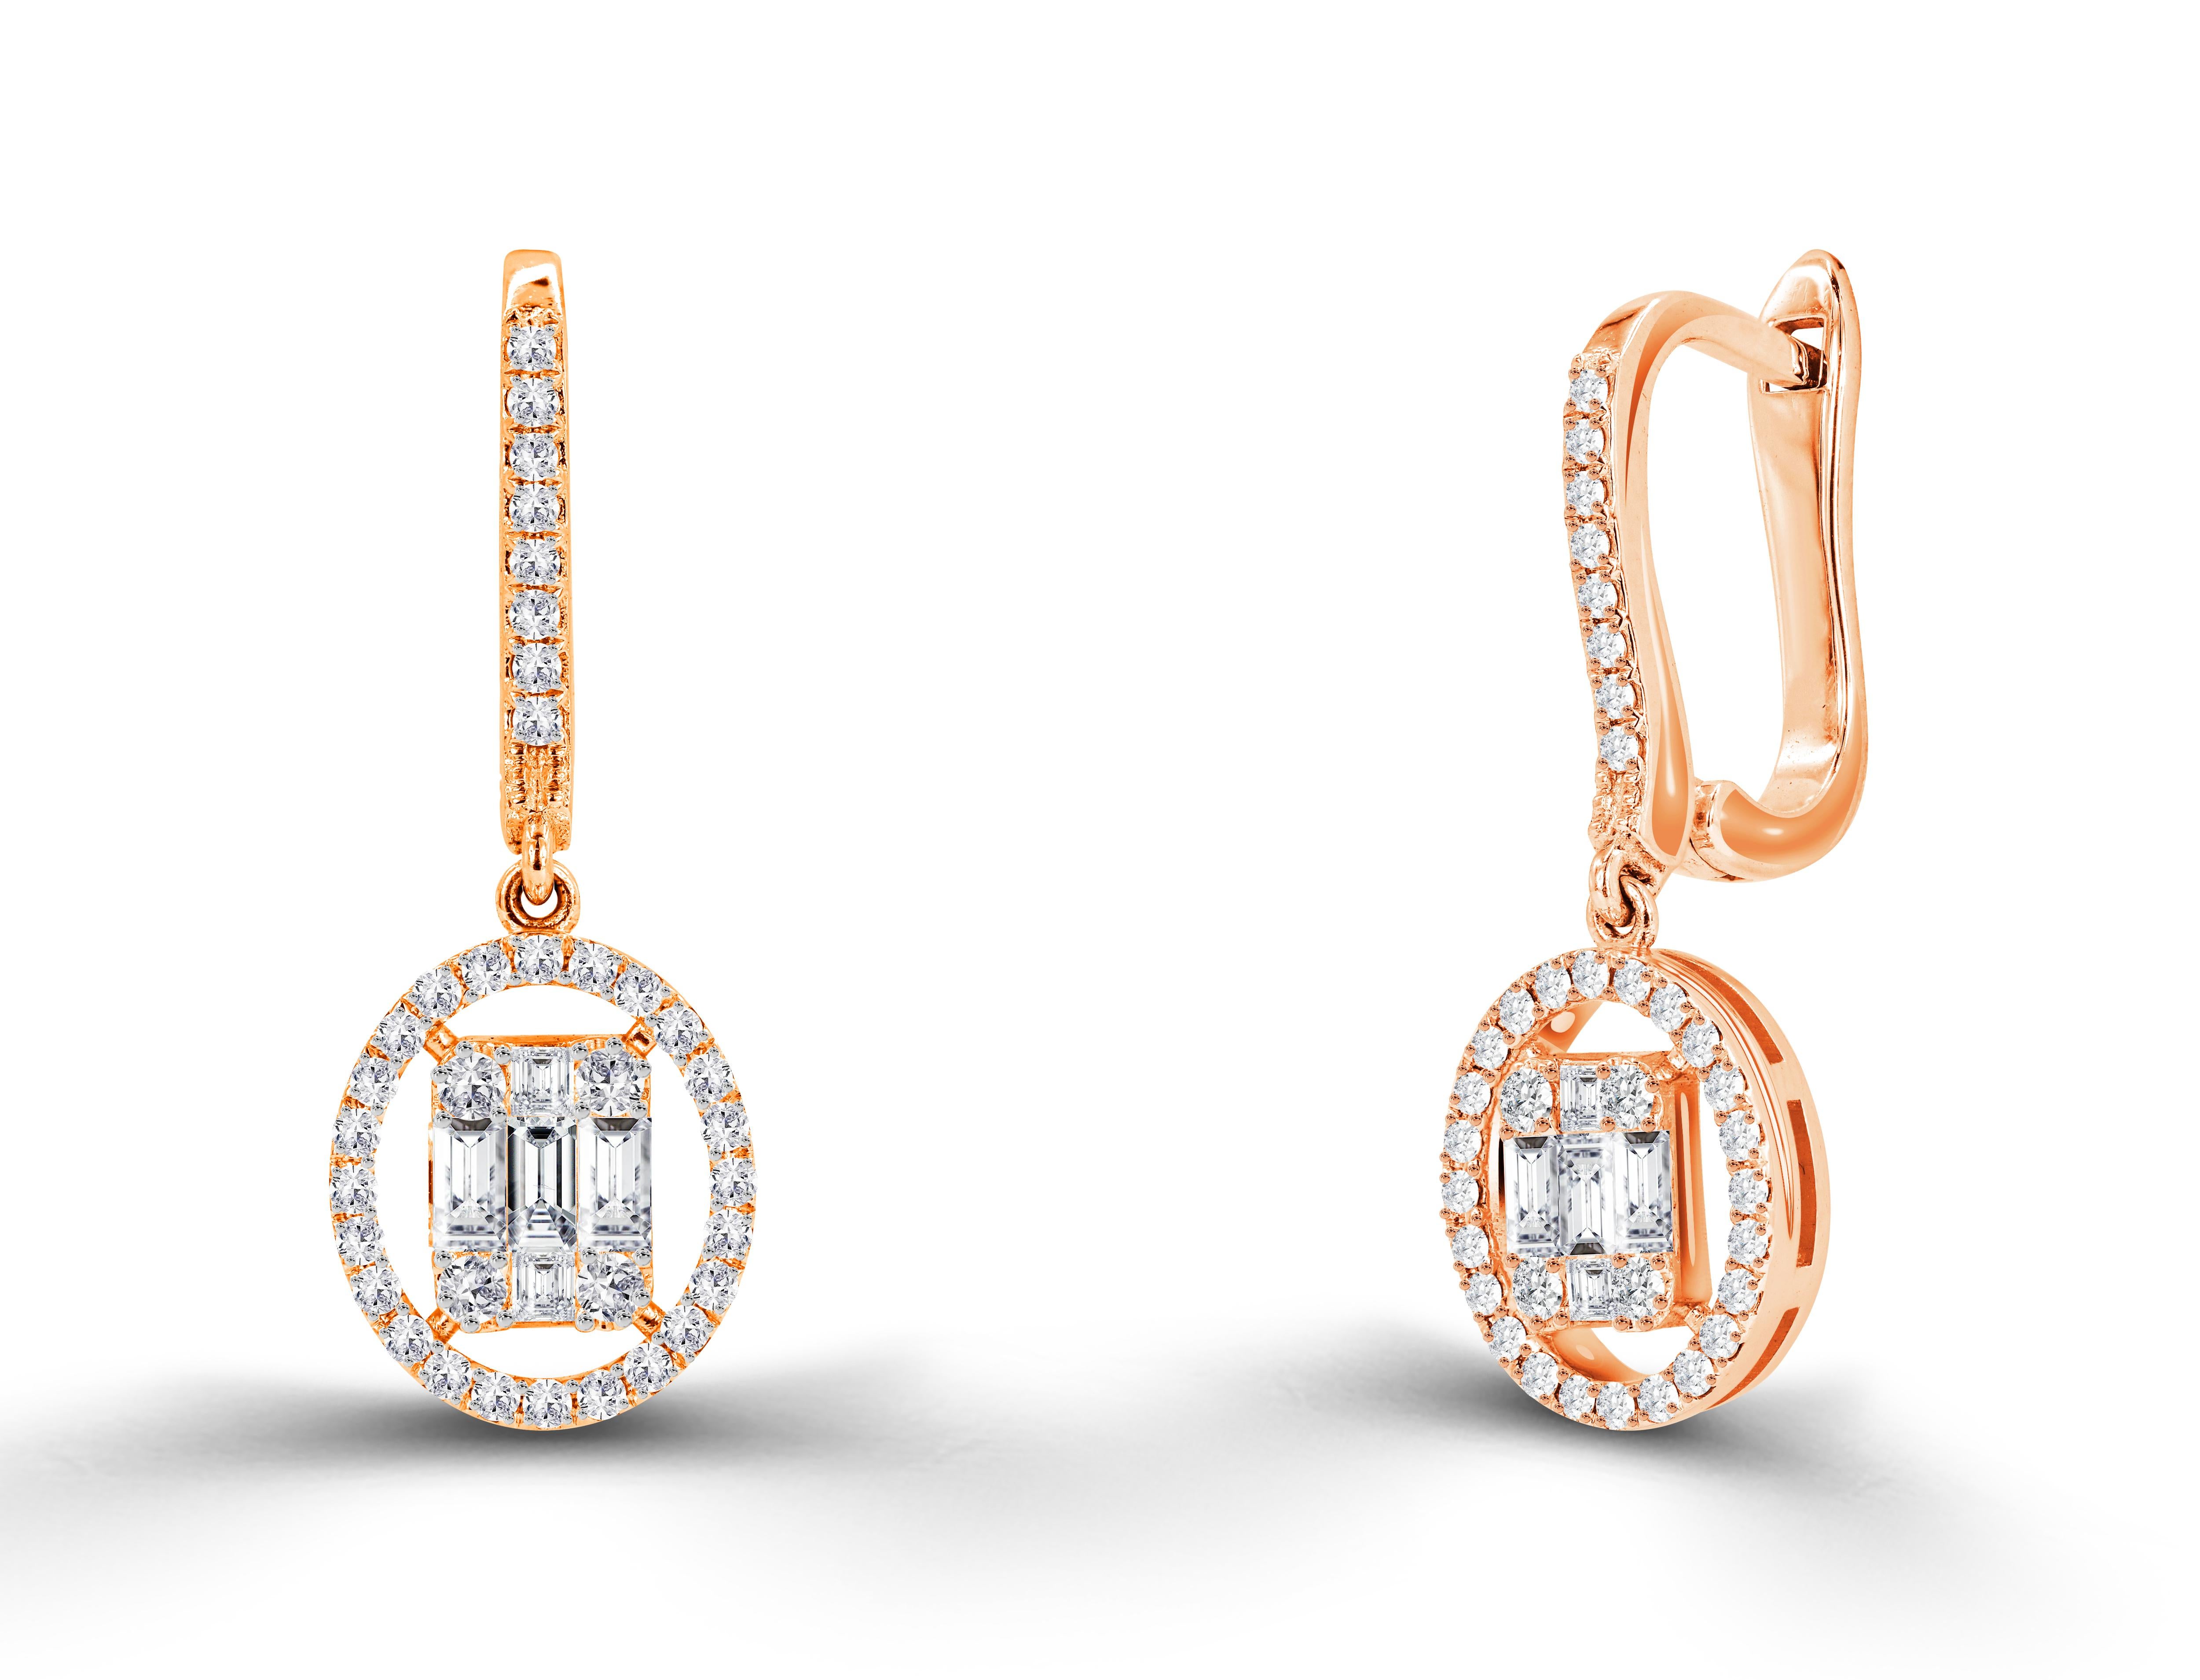 1.19 Ct Diamond  Baguette Drop Earrings in 14K Gold, Round Brilliant cut diamond earrings, Natural Diamond Earrings, Lever-Back earrings, Heavy End Earrings.

Oshi Jewels presents to you a beautiful Earring collection with natural diamonds that last